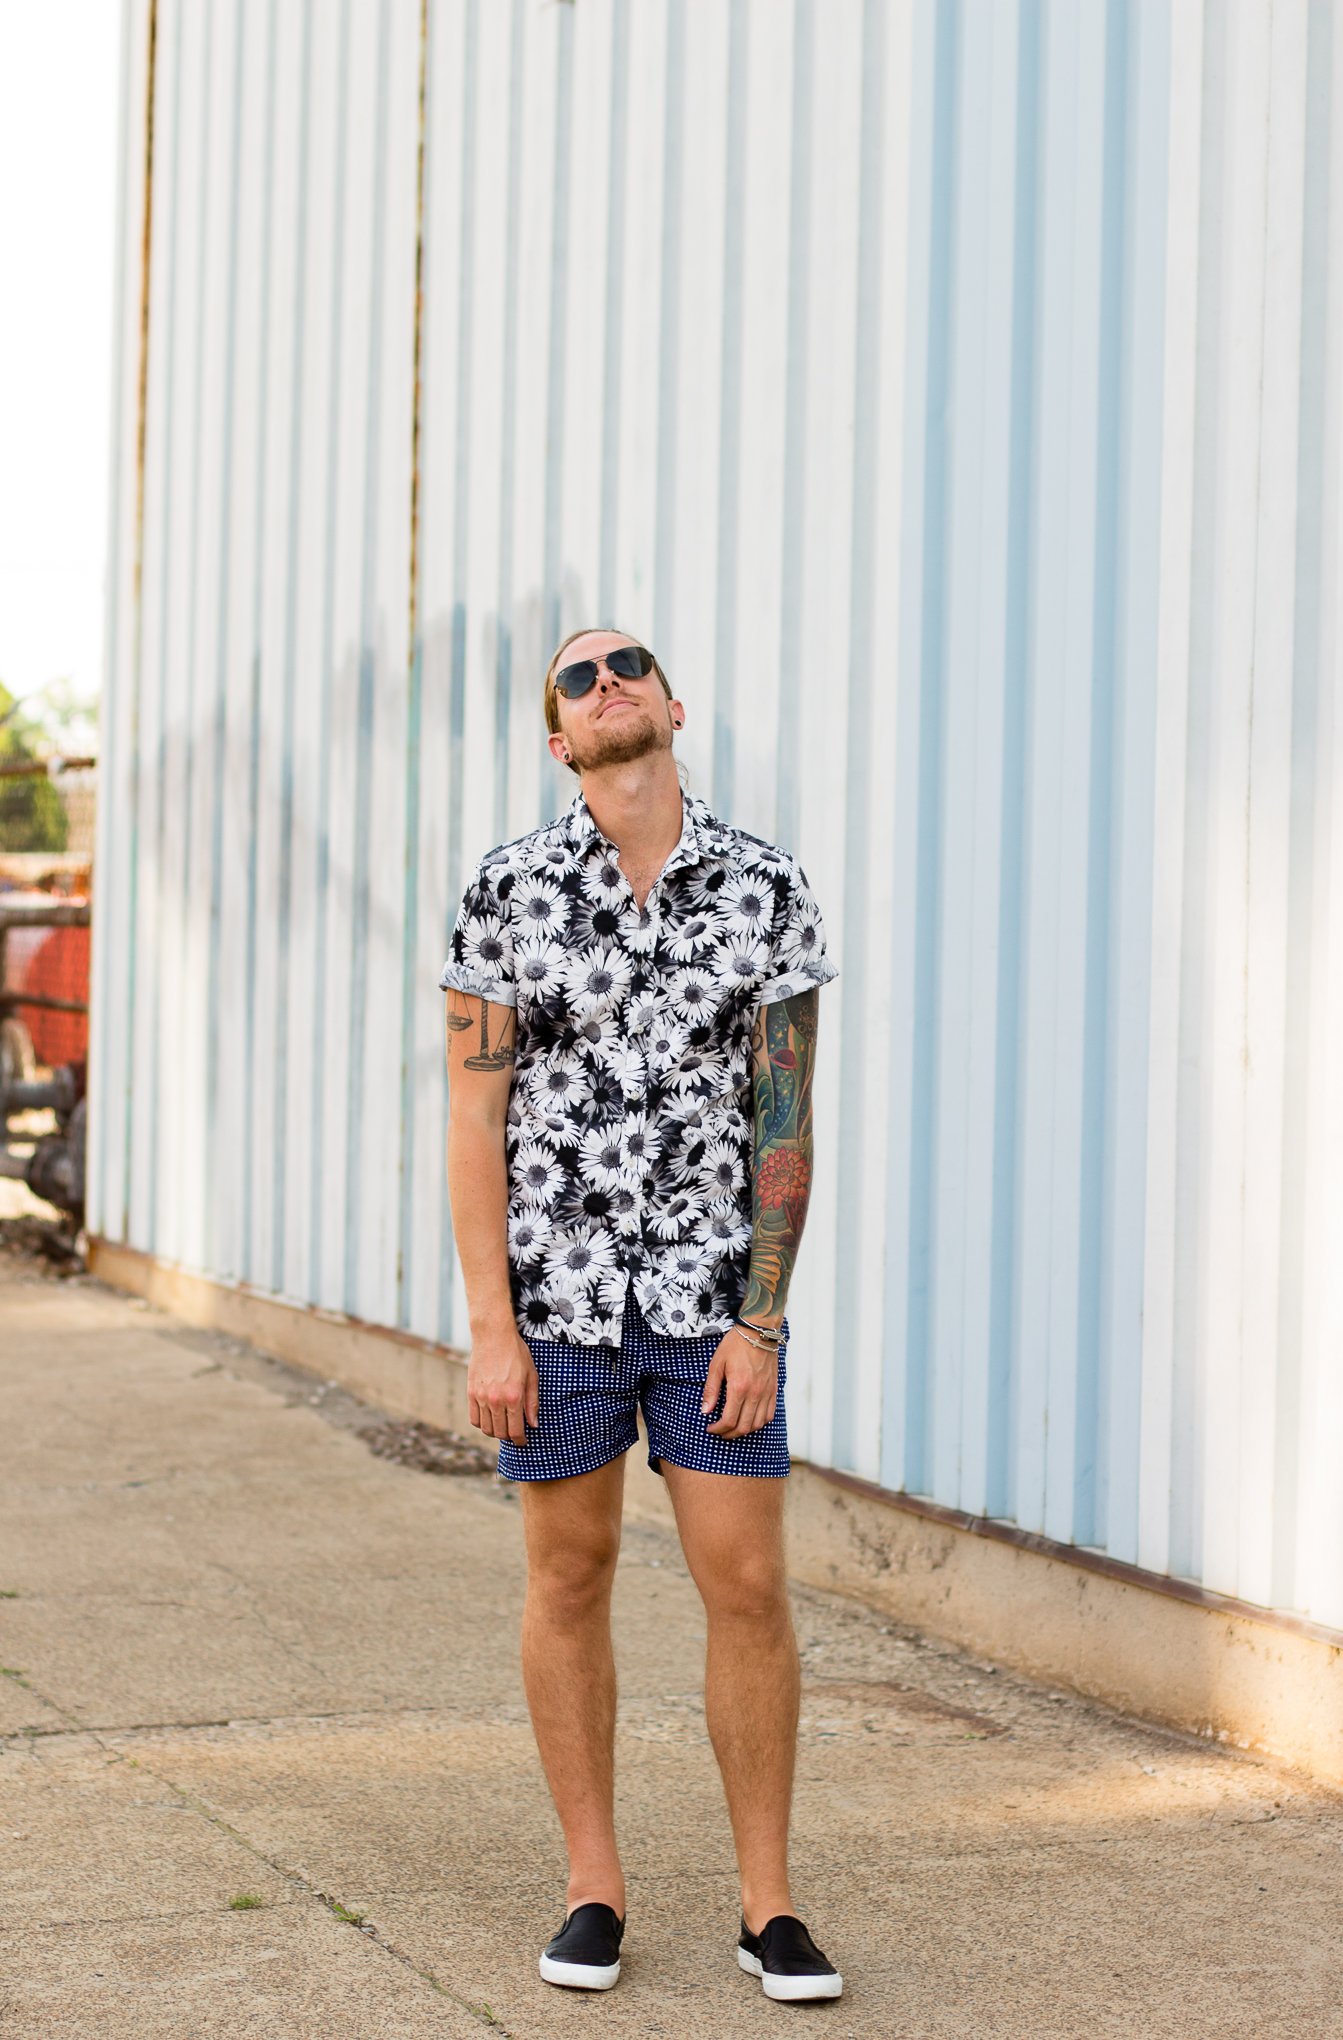 topman, hm, floral shirts, printed shorts, how to wear prints